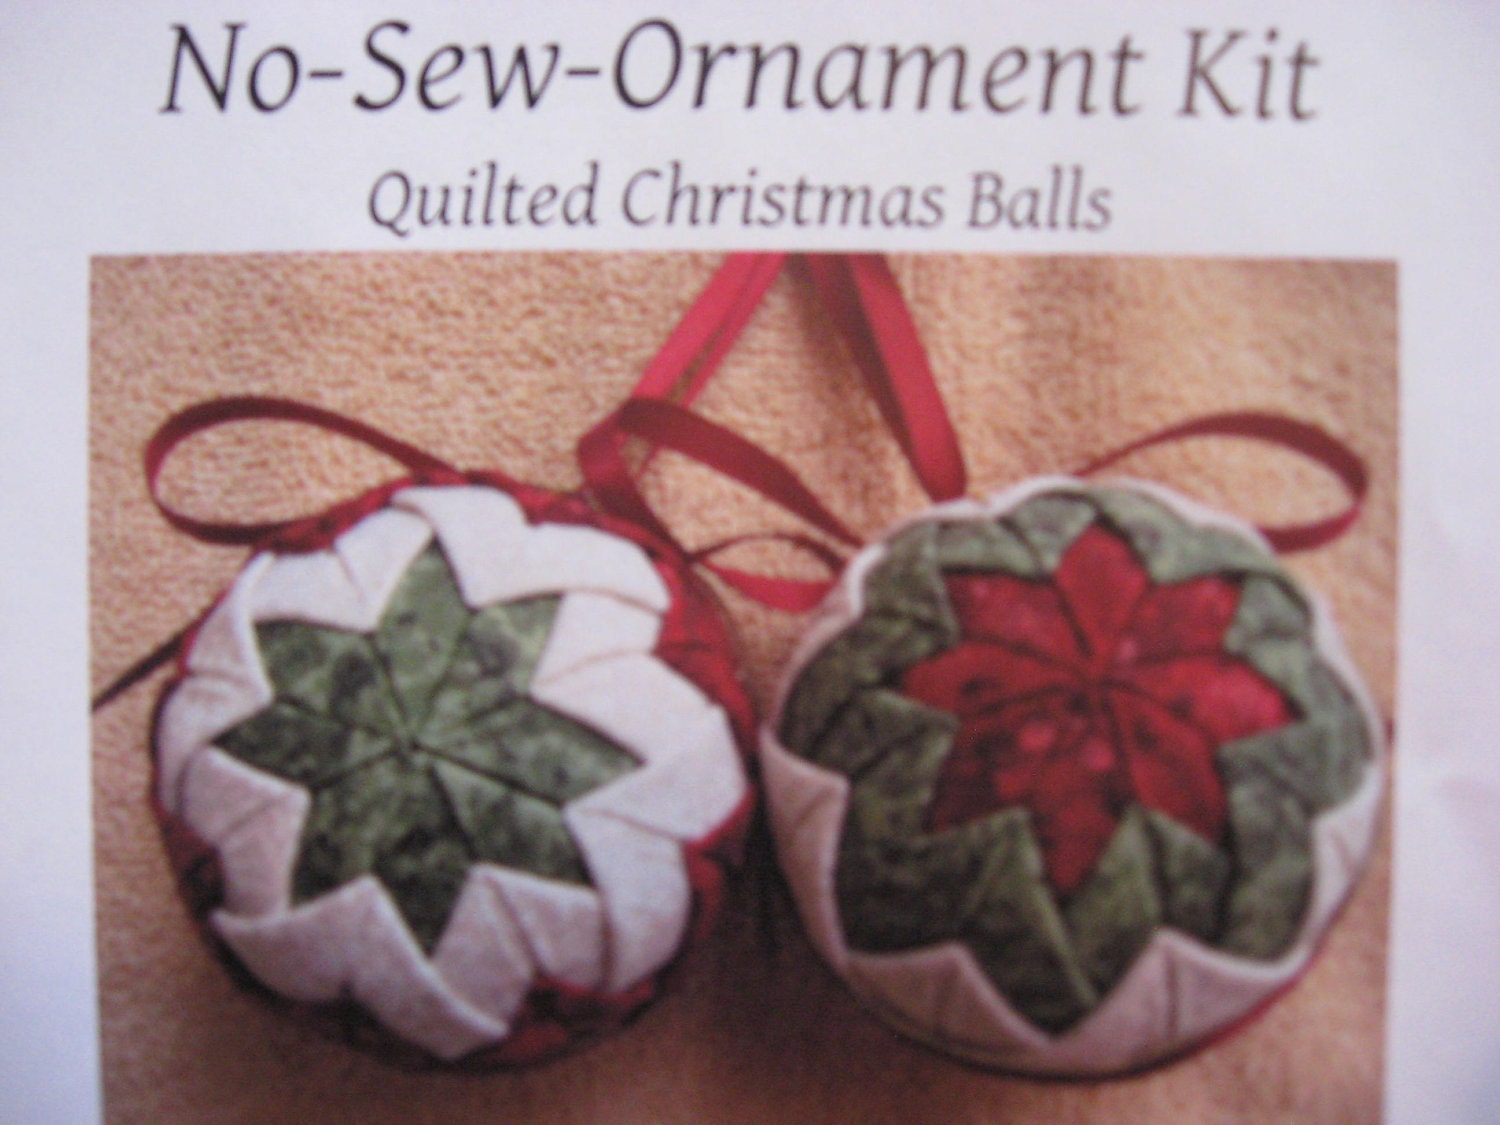 Quilted Christmas Ornaments Complete NoSewKits by genkalt